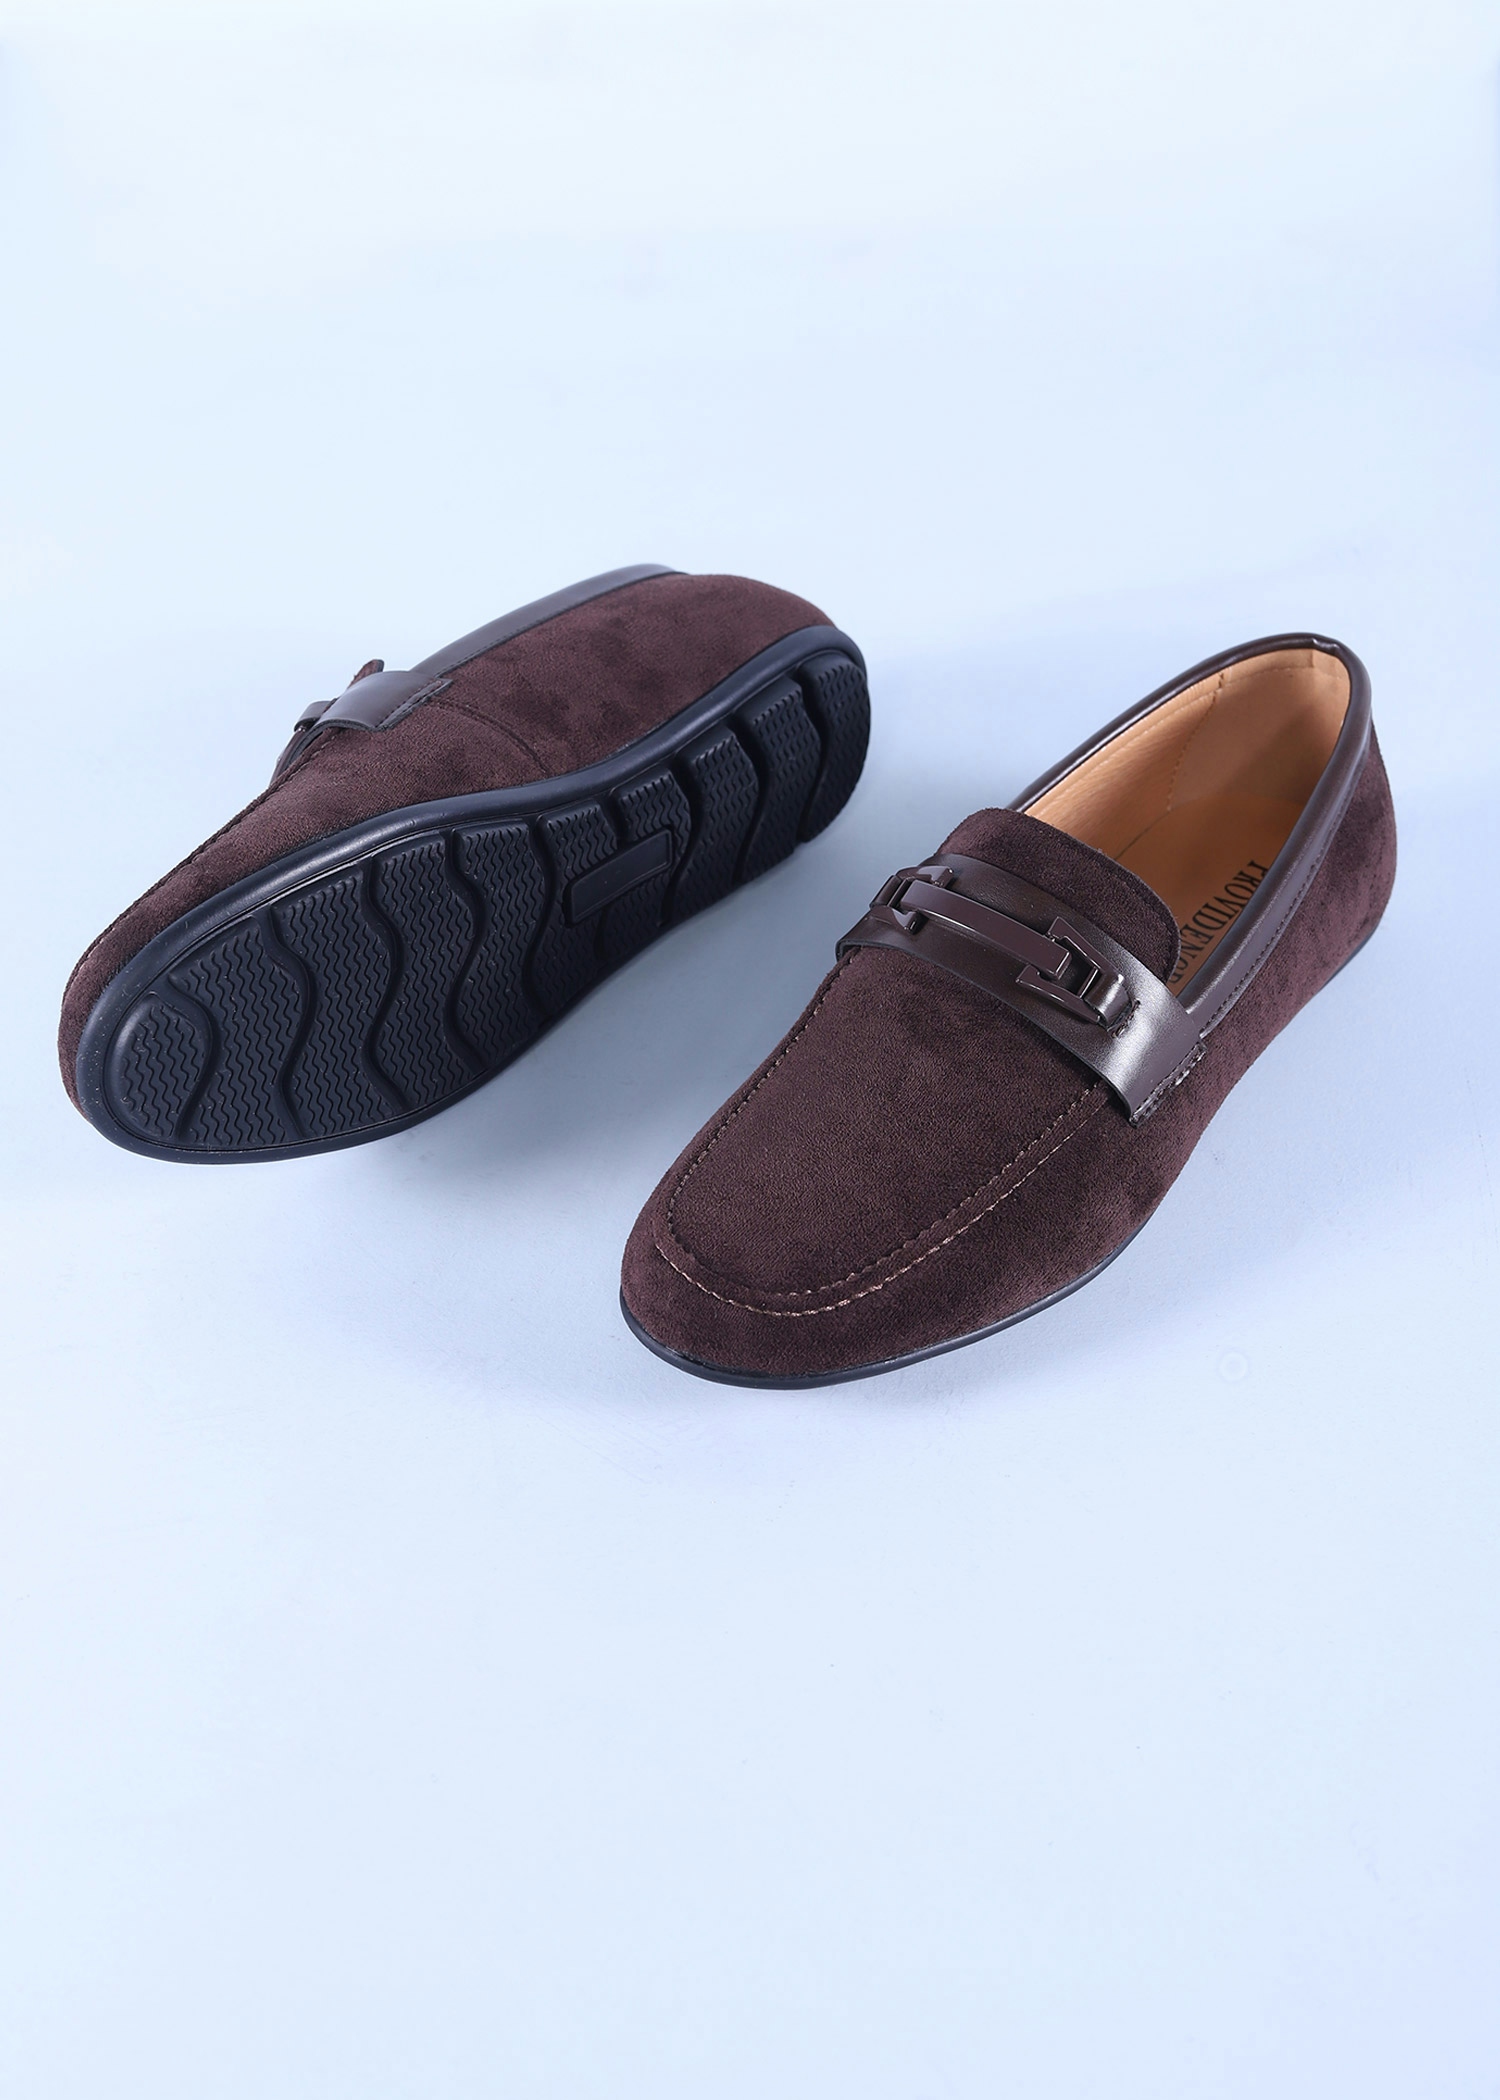 tagus mens shoes chocolate color sole